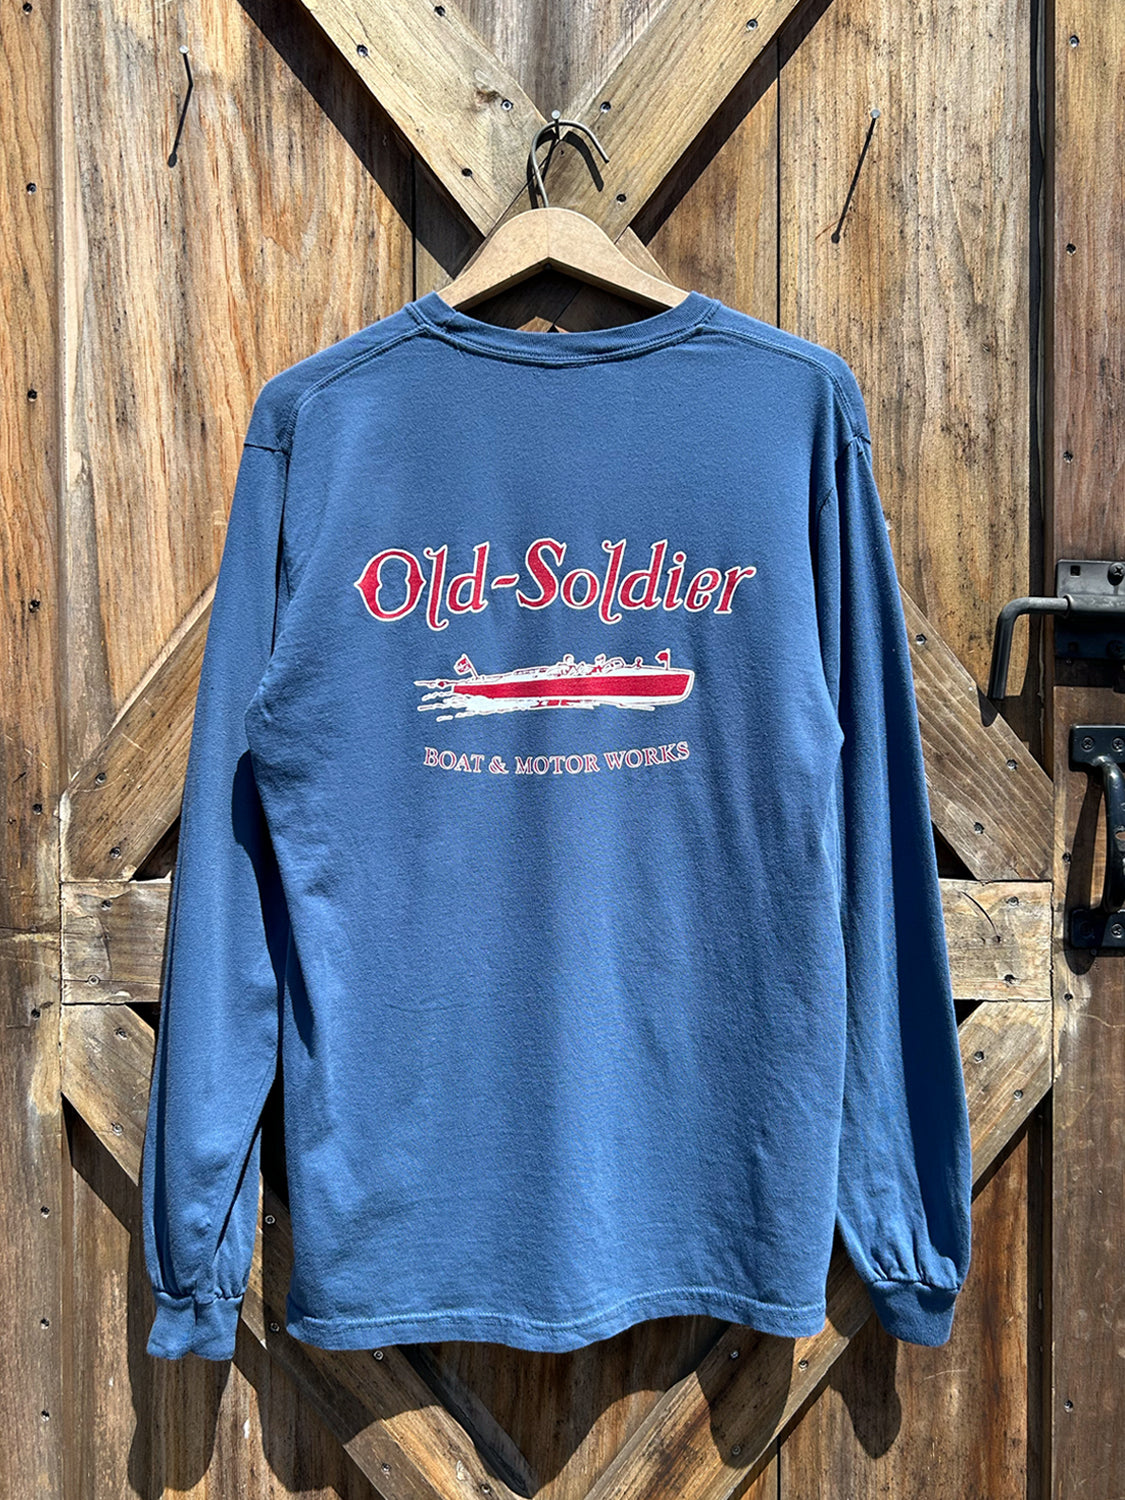 OLD SOLDIER - A Yachtsman's Company - Great South Bay, New York